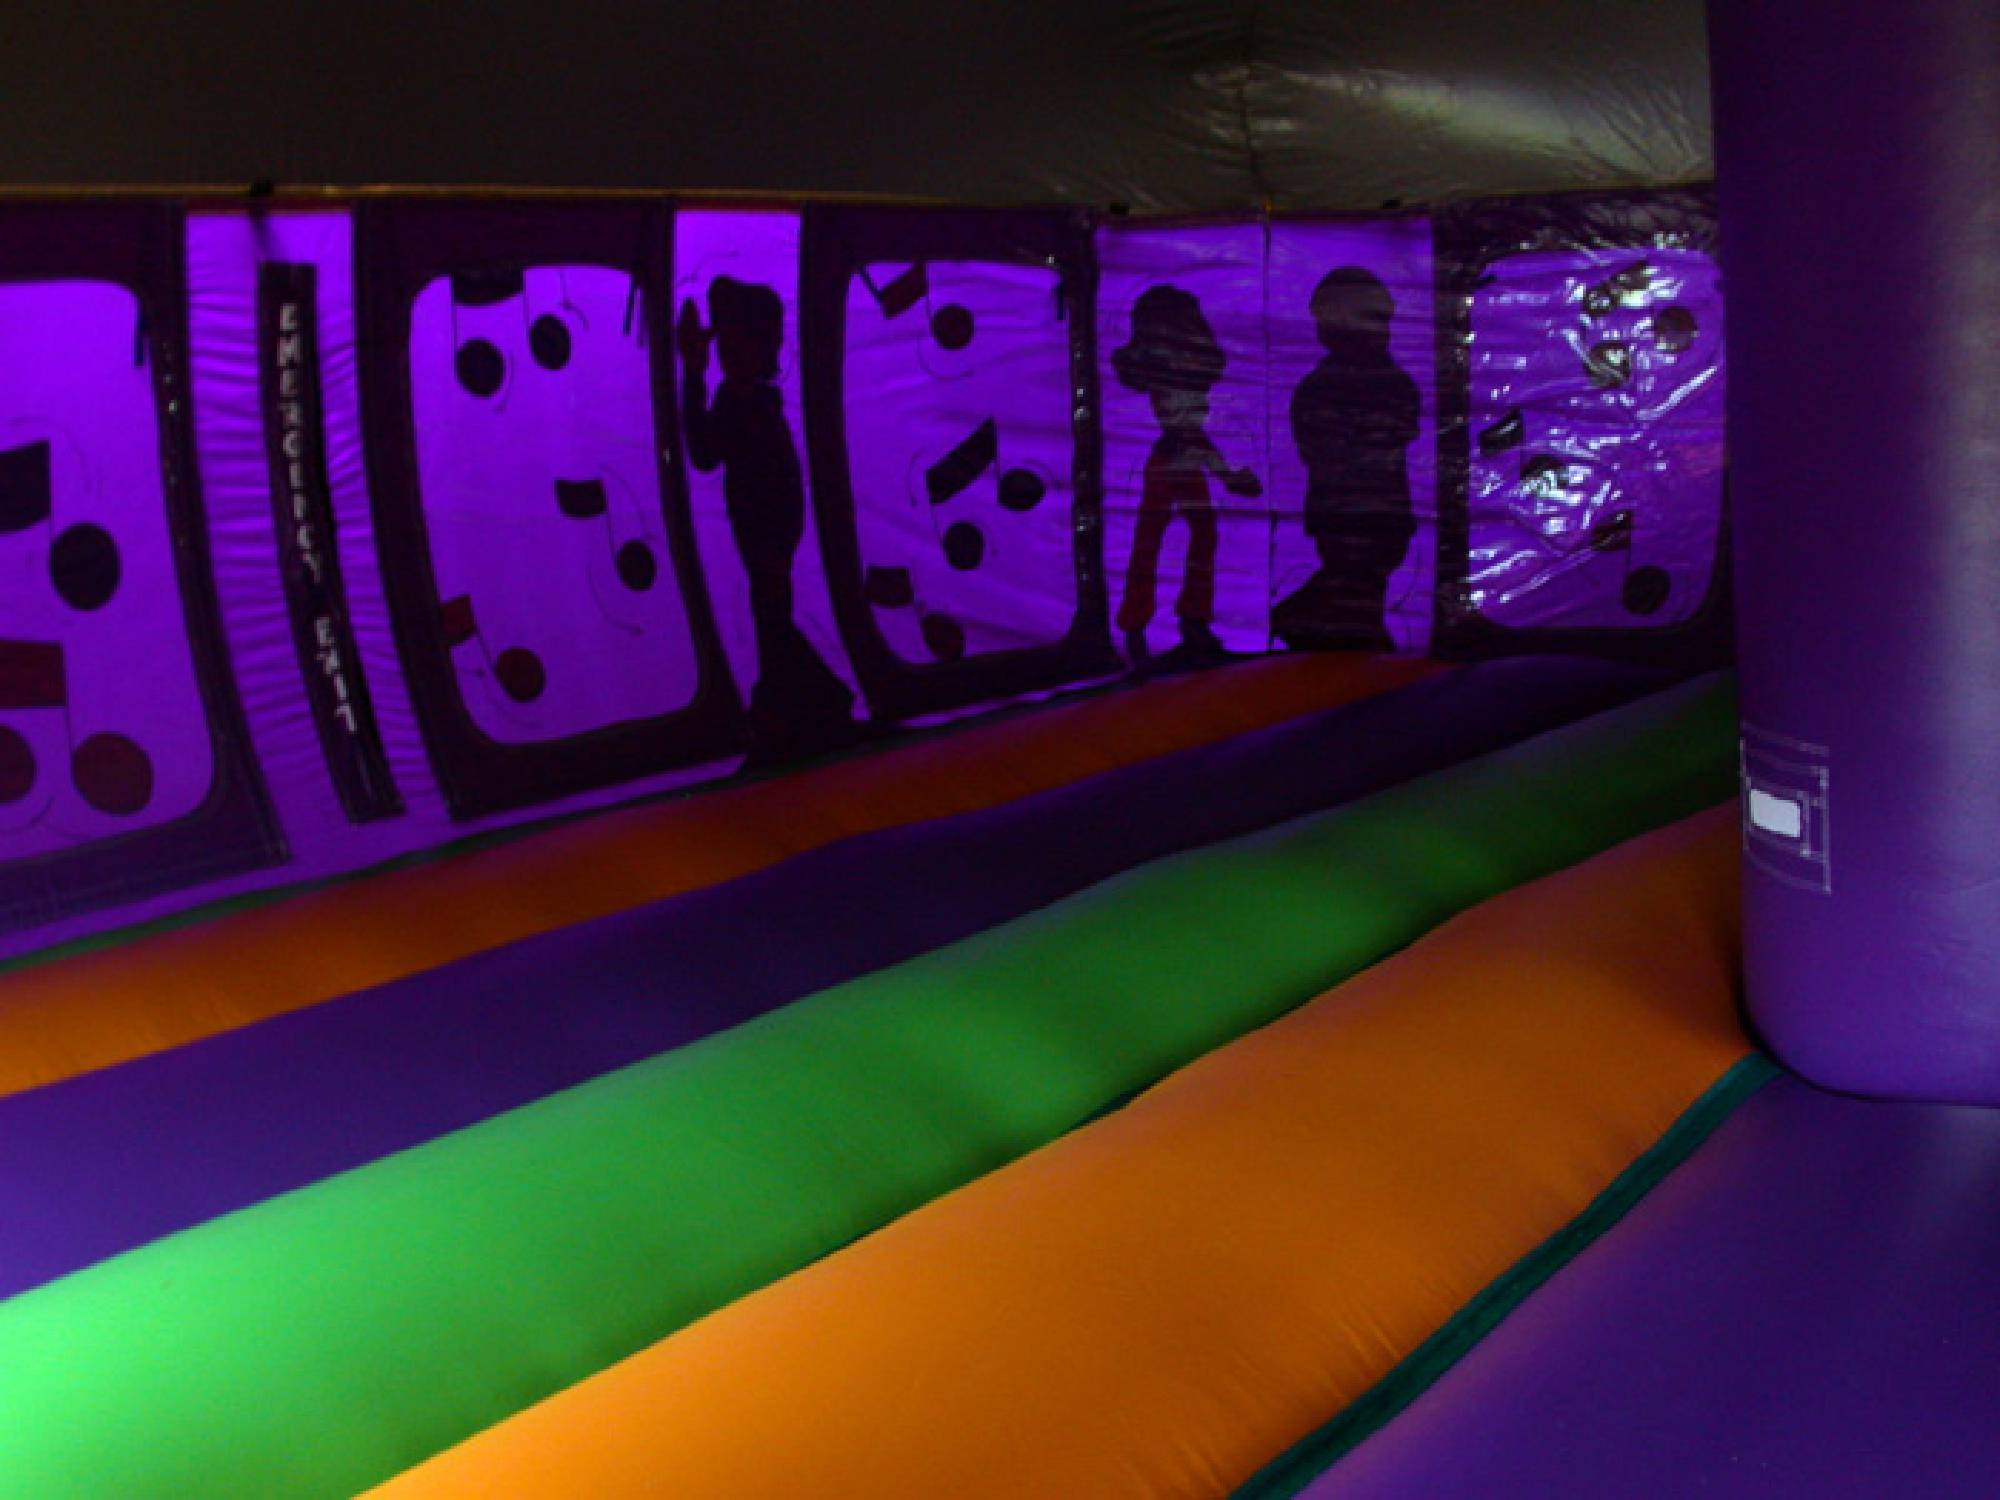 Another inside view of the Disco Dome bounce house